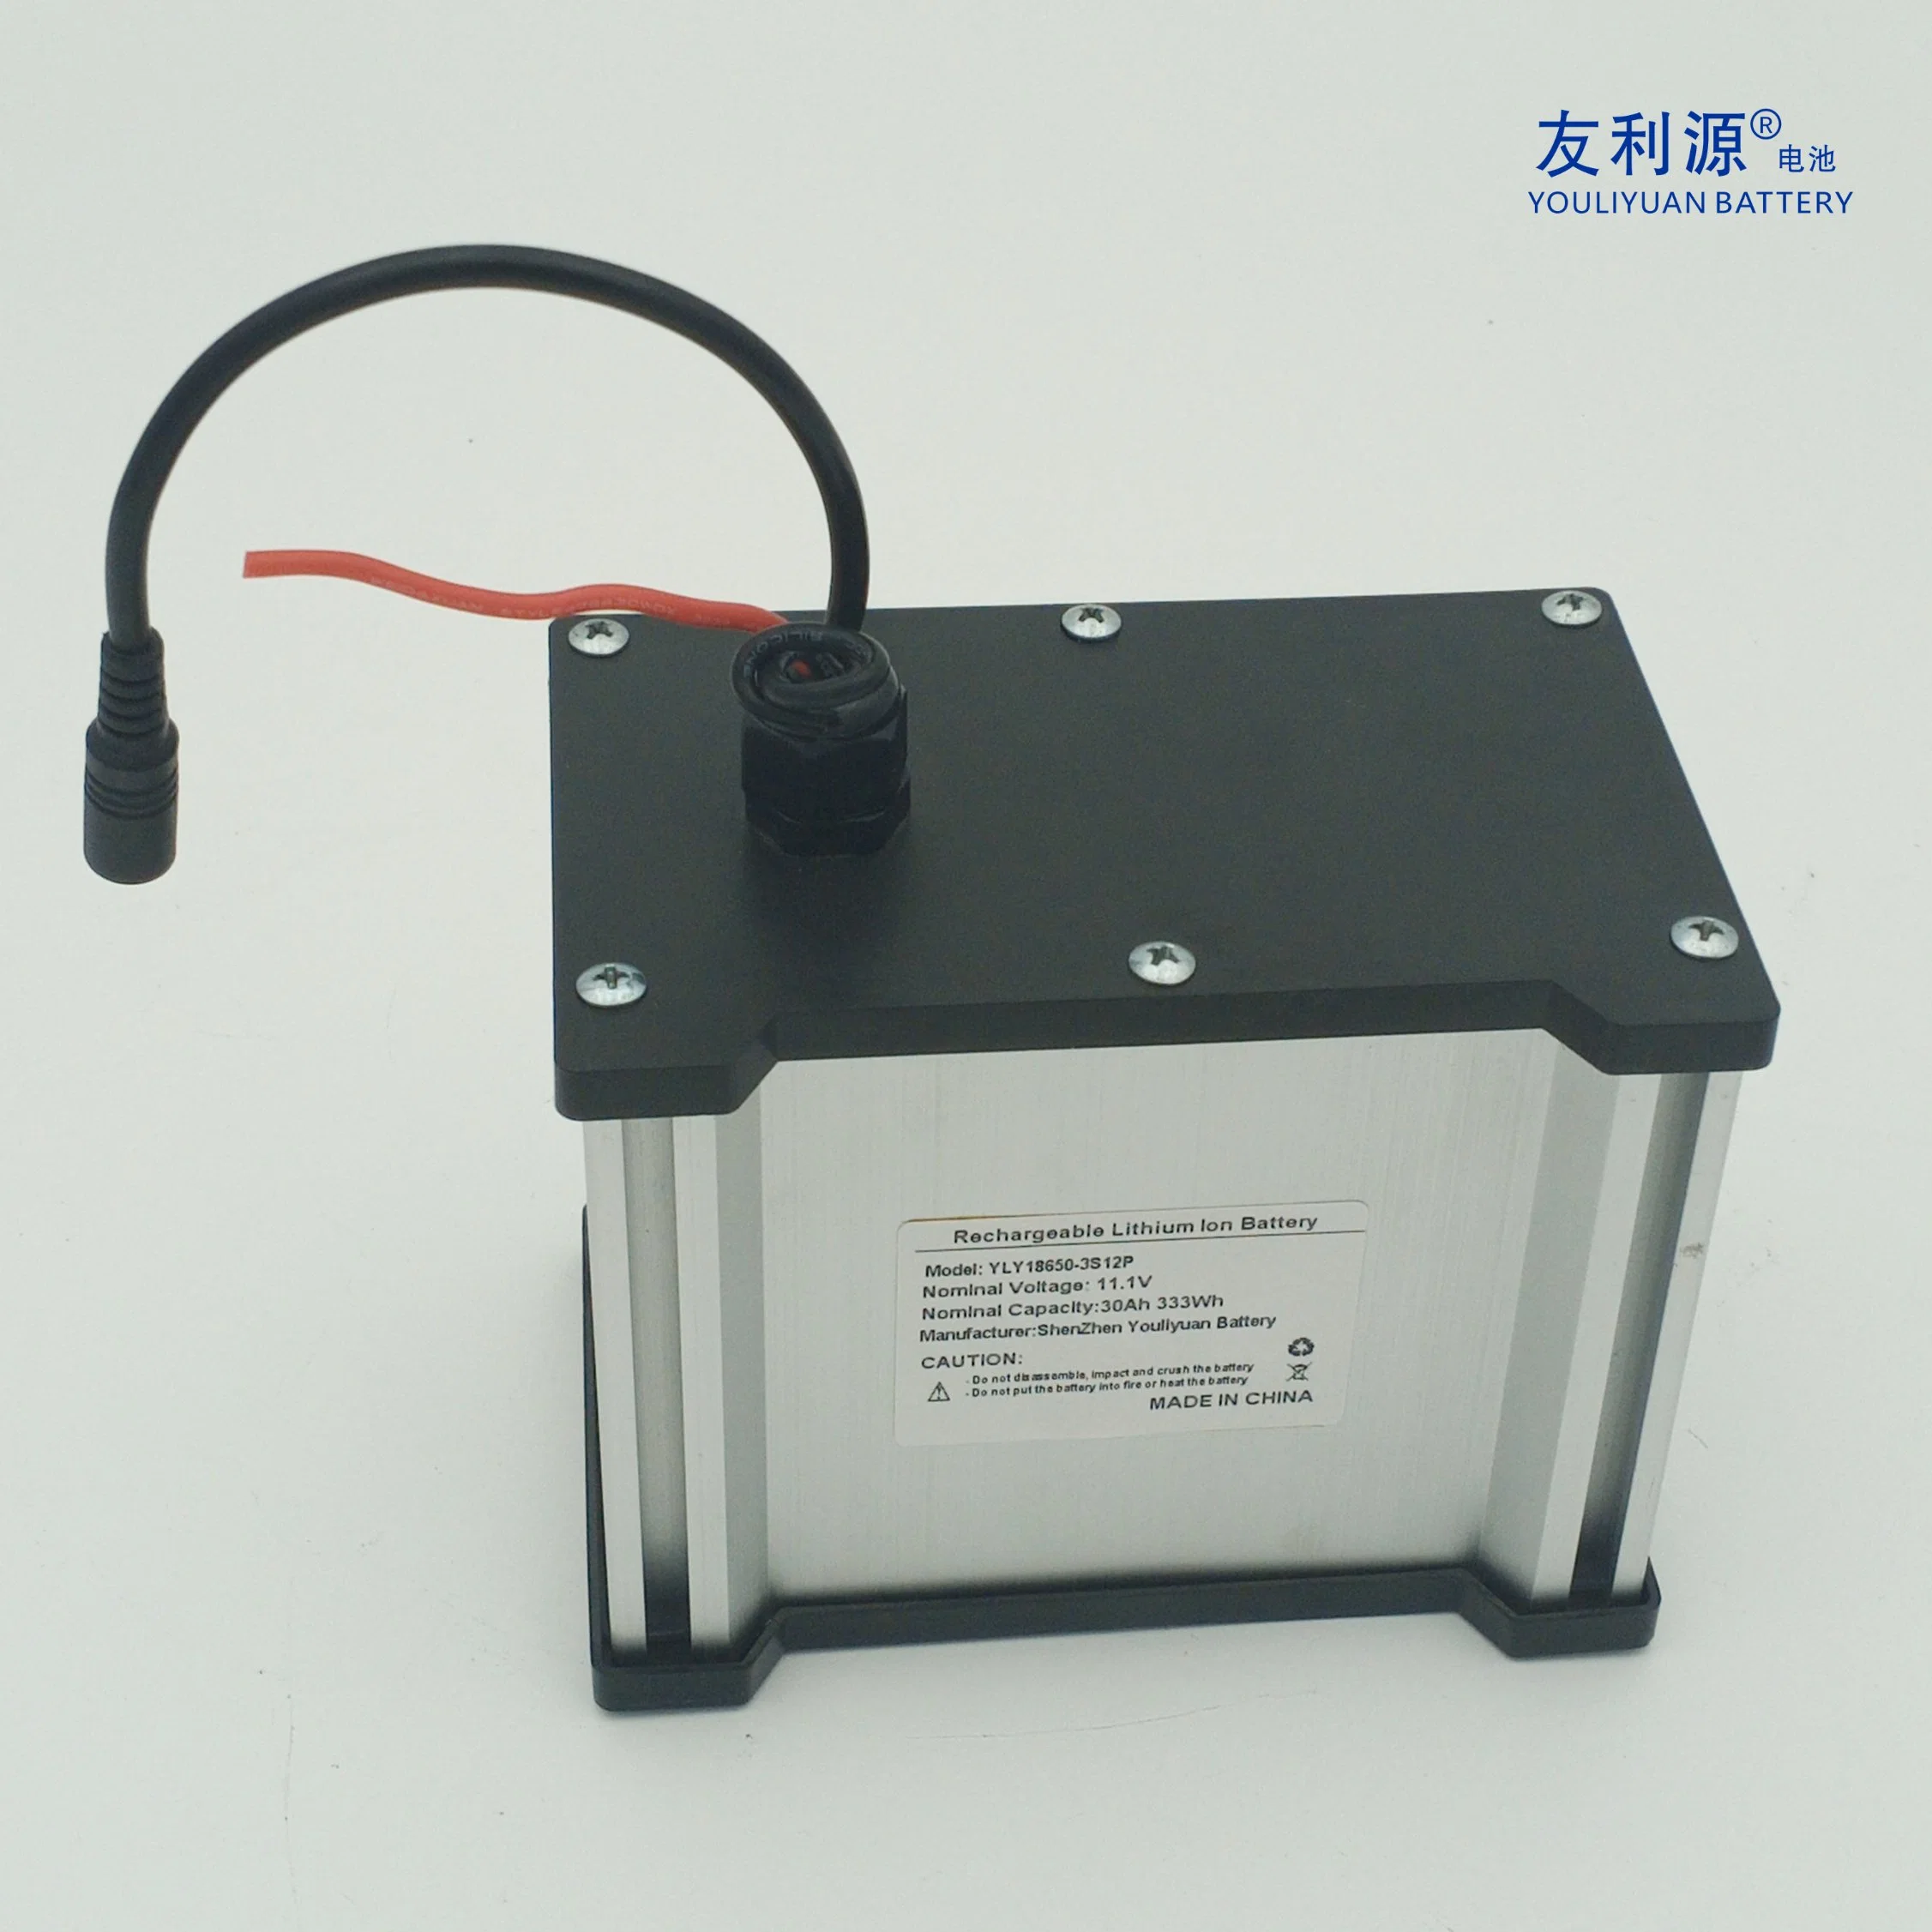 3s12p 18650 Battery 12V Lithium Battery High Capacity Energy Storage Li-ion Battery 30ah 333wh with Aluminum Housing for Smart Bench /Light